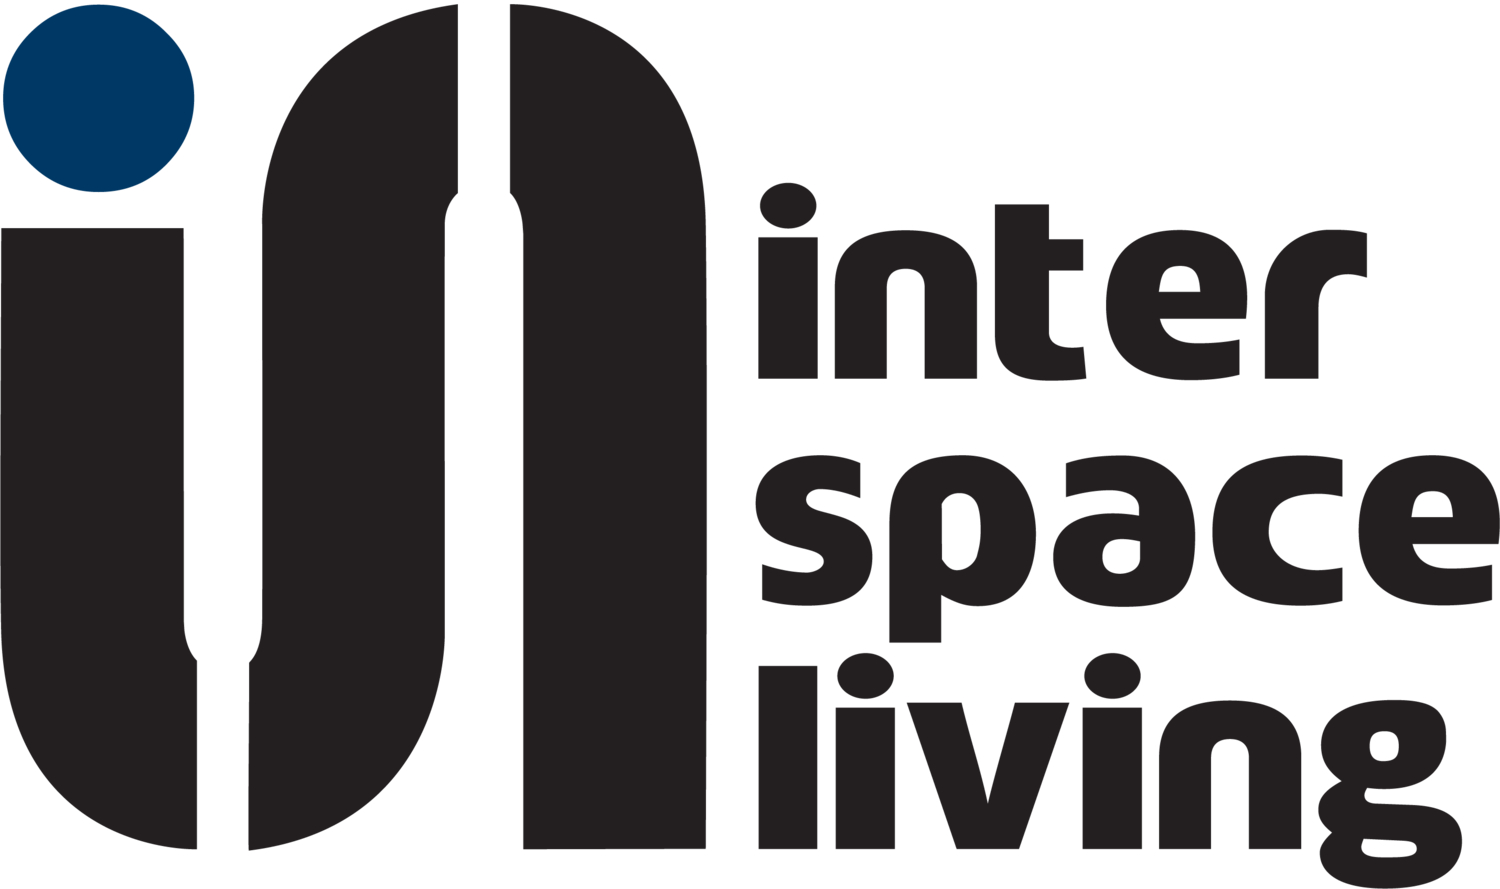 InterSpaceLiving is a leading company providing a premium turn key approach for student housing, multi unit, and hospitality projects nationwide. 